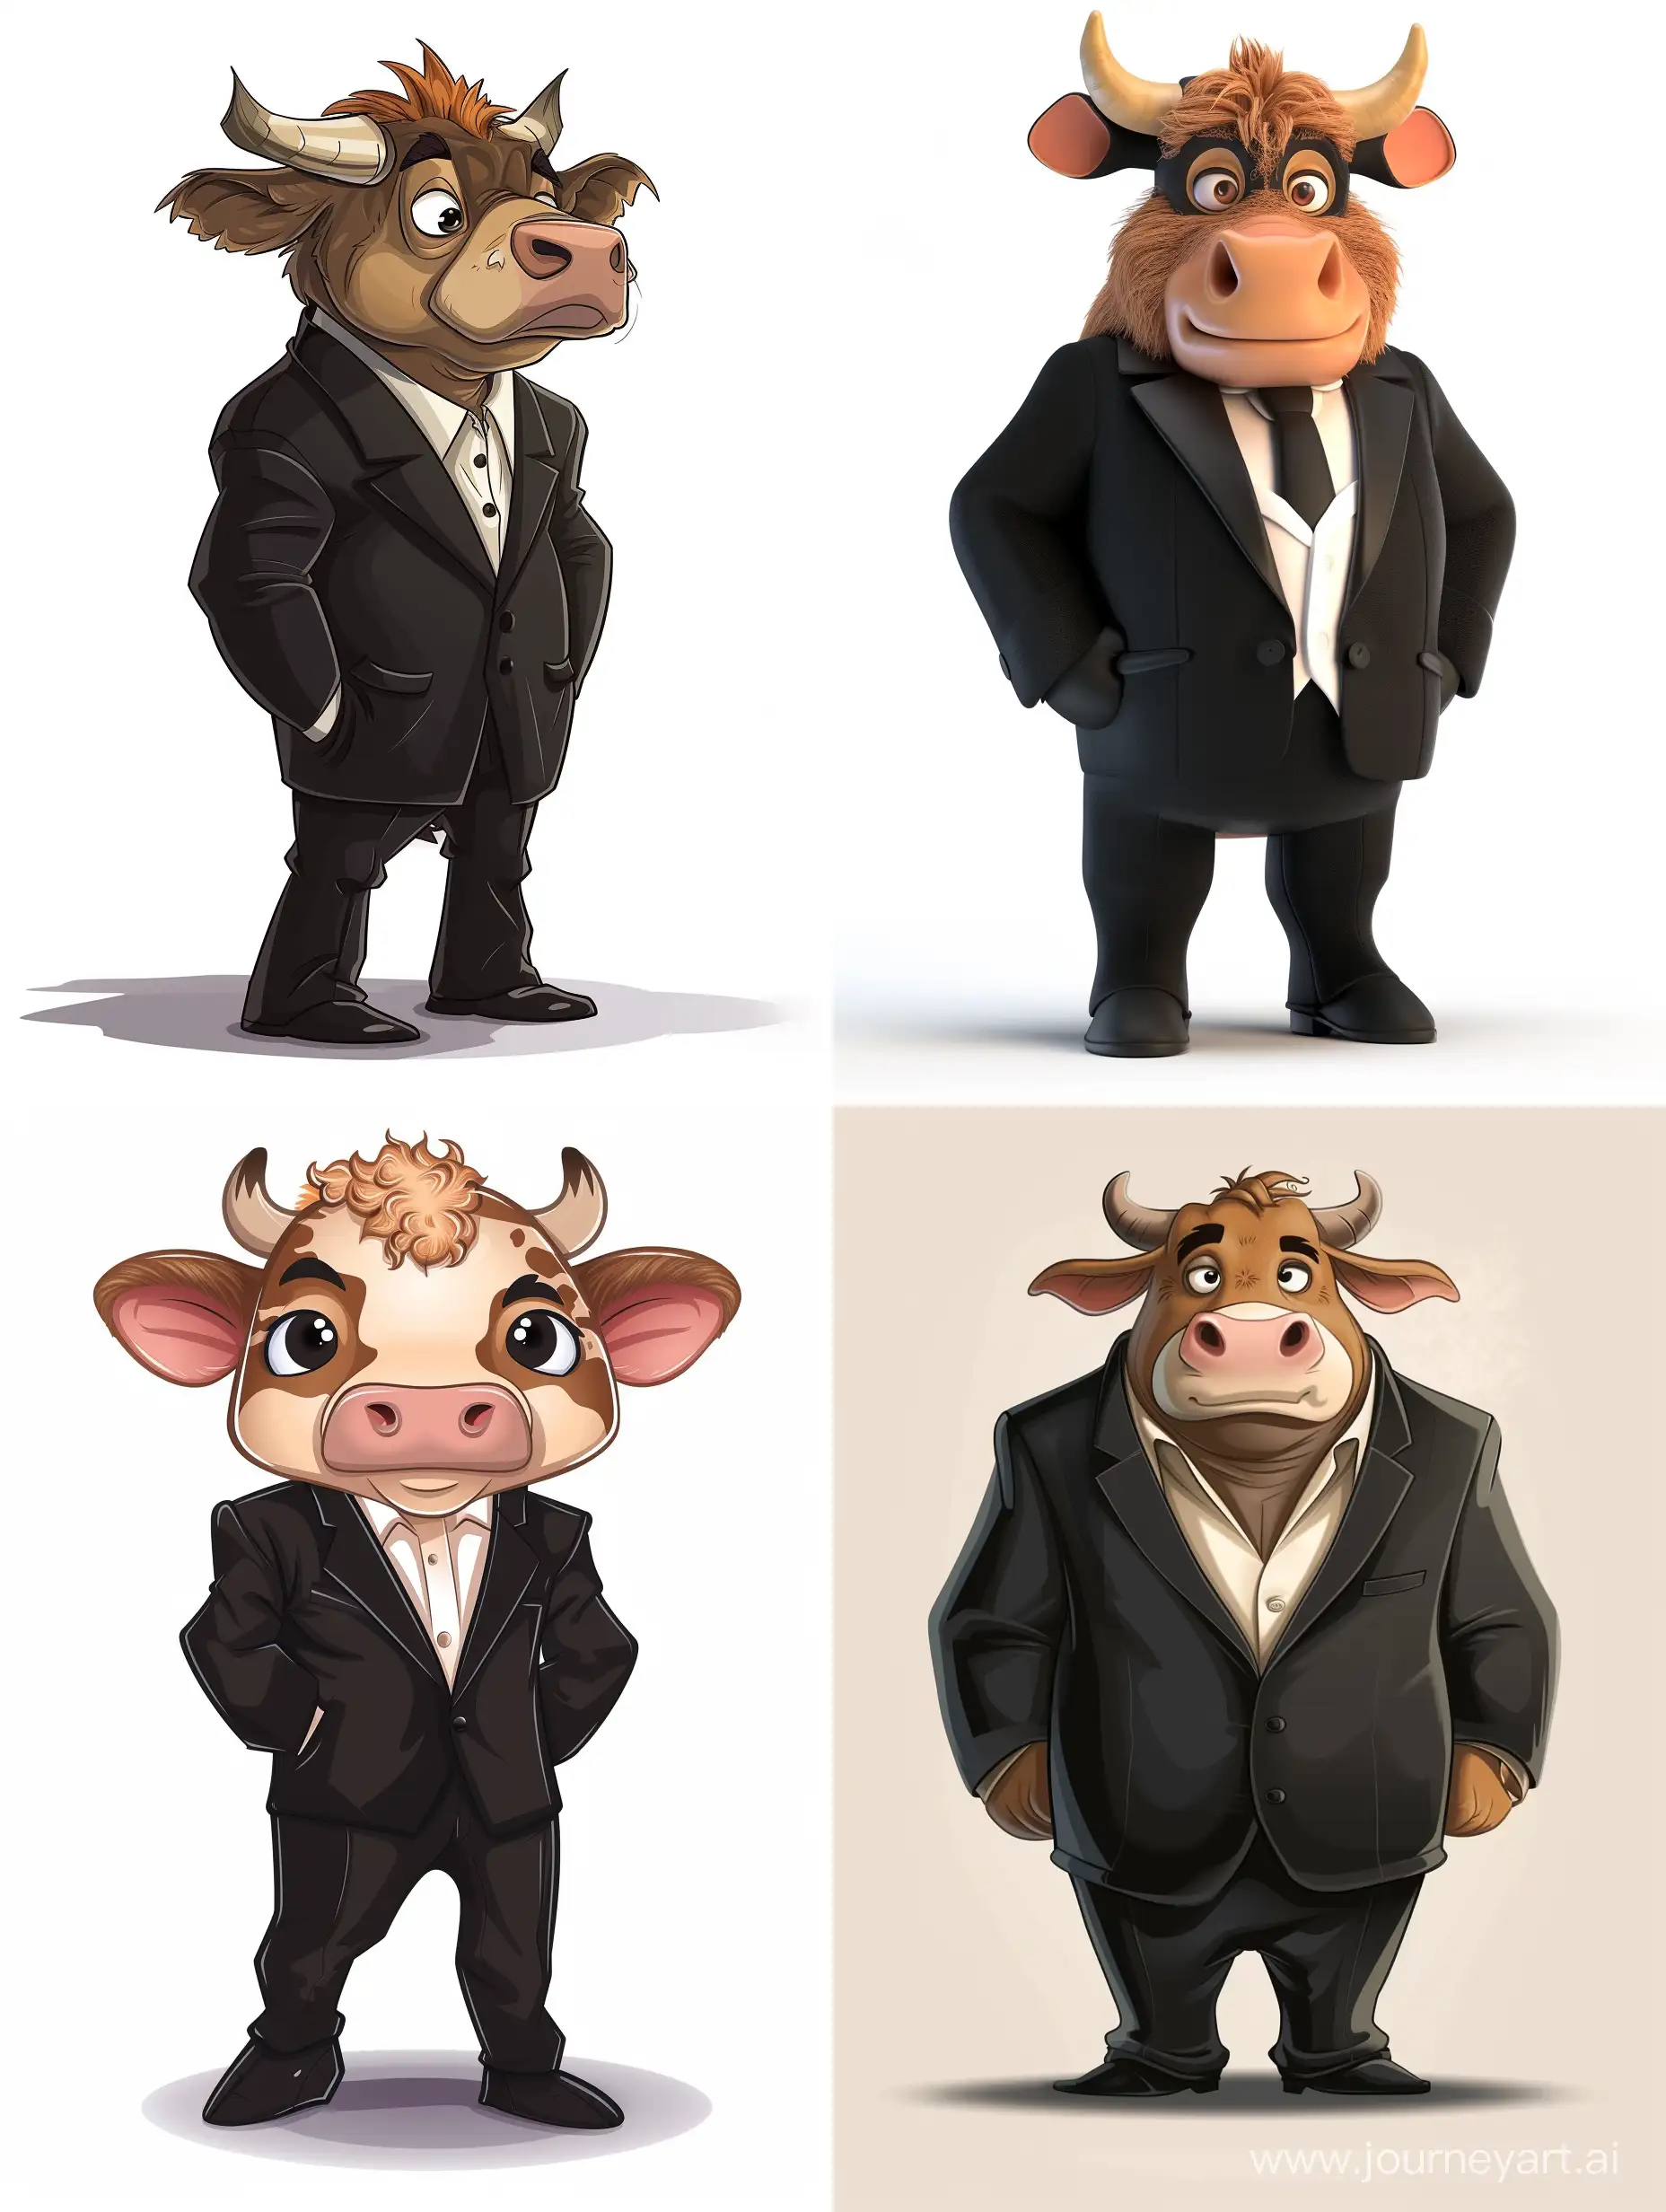 Stylish-Cartoon-Cow-in-Black-Suit-Playful-Anthropomorphic-Furry-Character